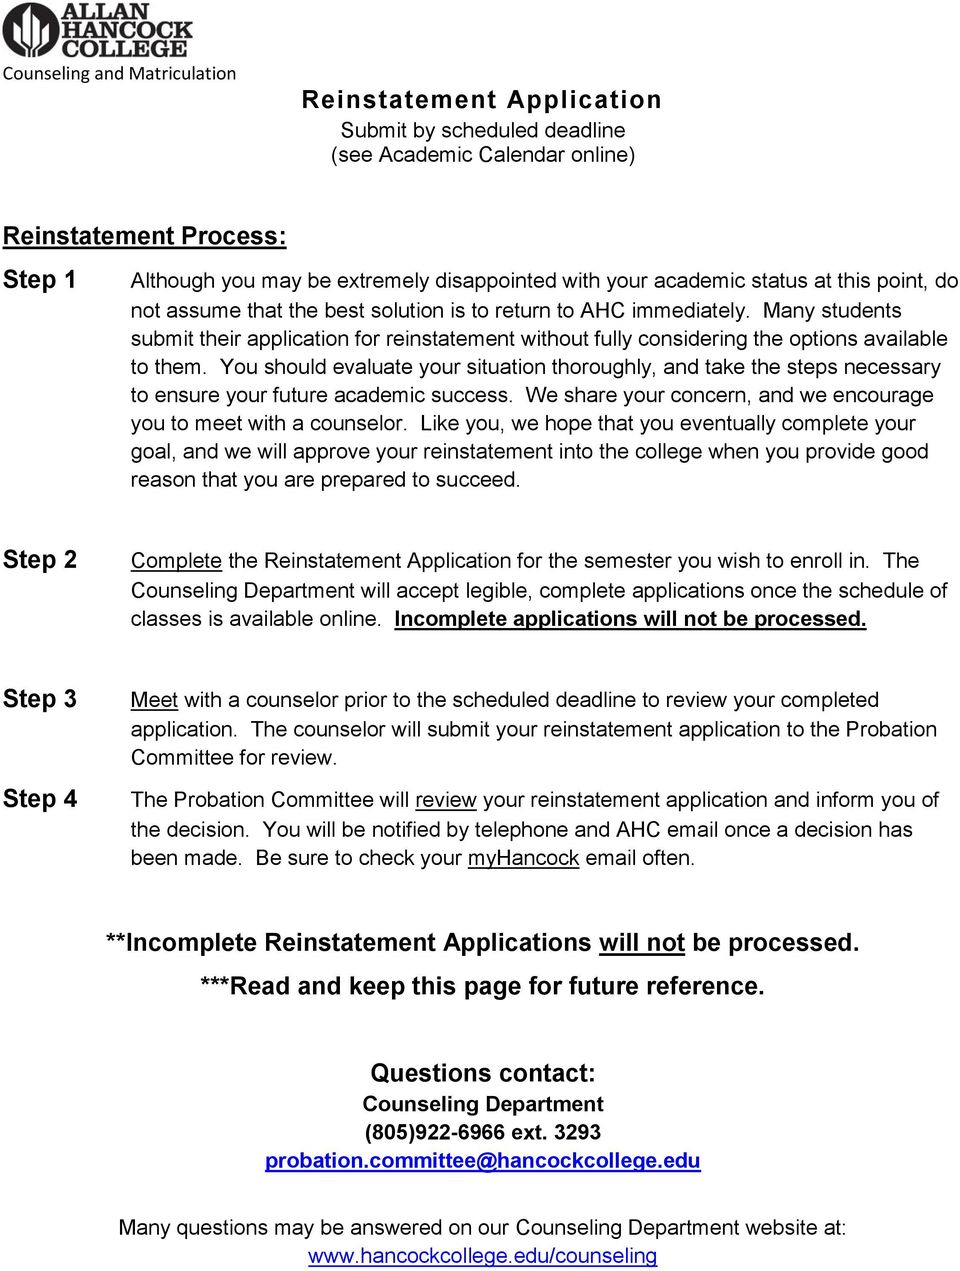 Many students submit their application for reinstatement without fully considering the options available to them.